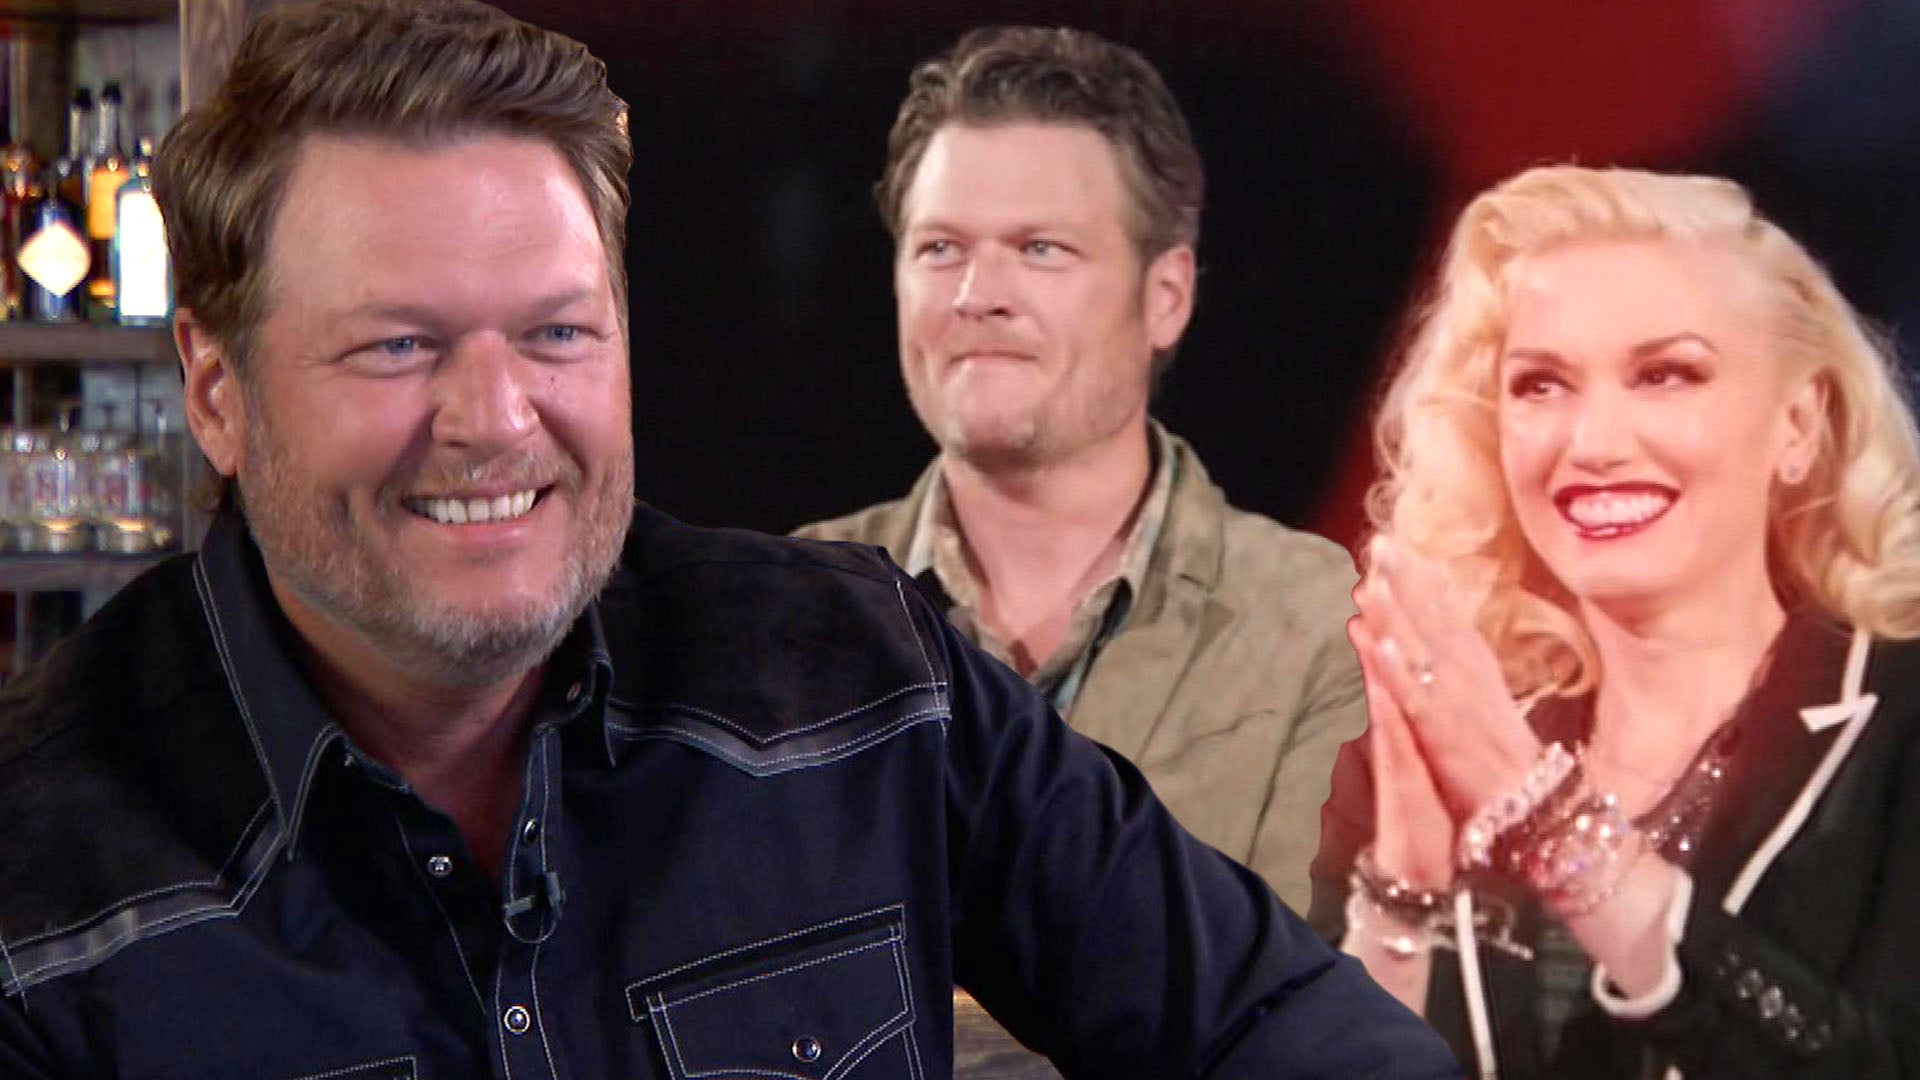 Blake Shelton on 10 Years of Having Gwen Stefani in His Life and Joy of Being a Stepdad 